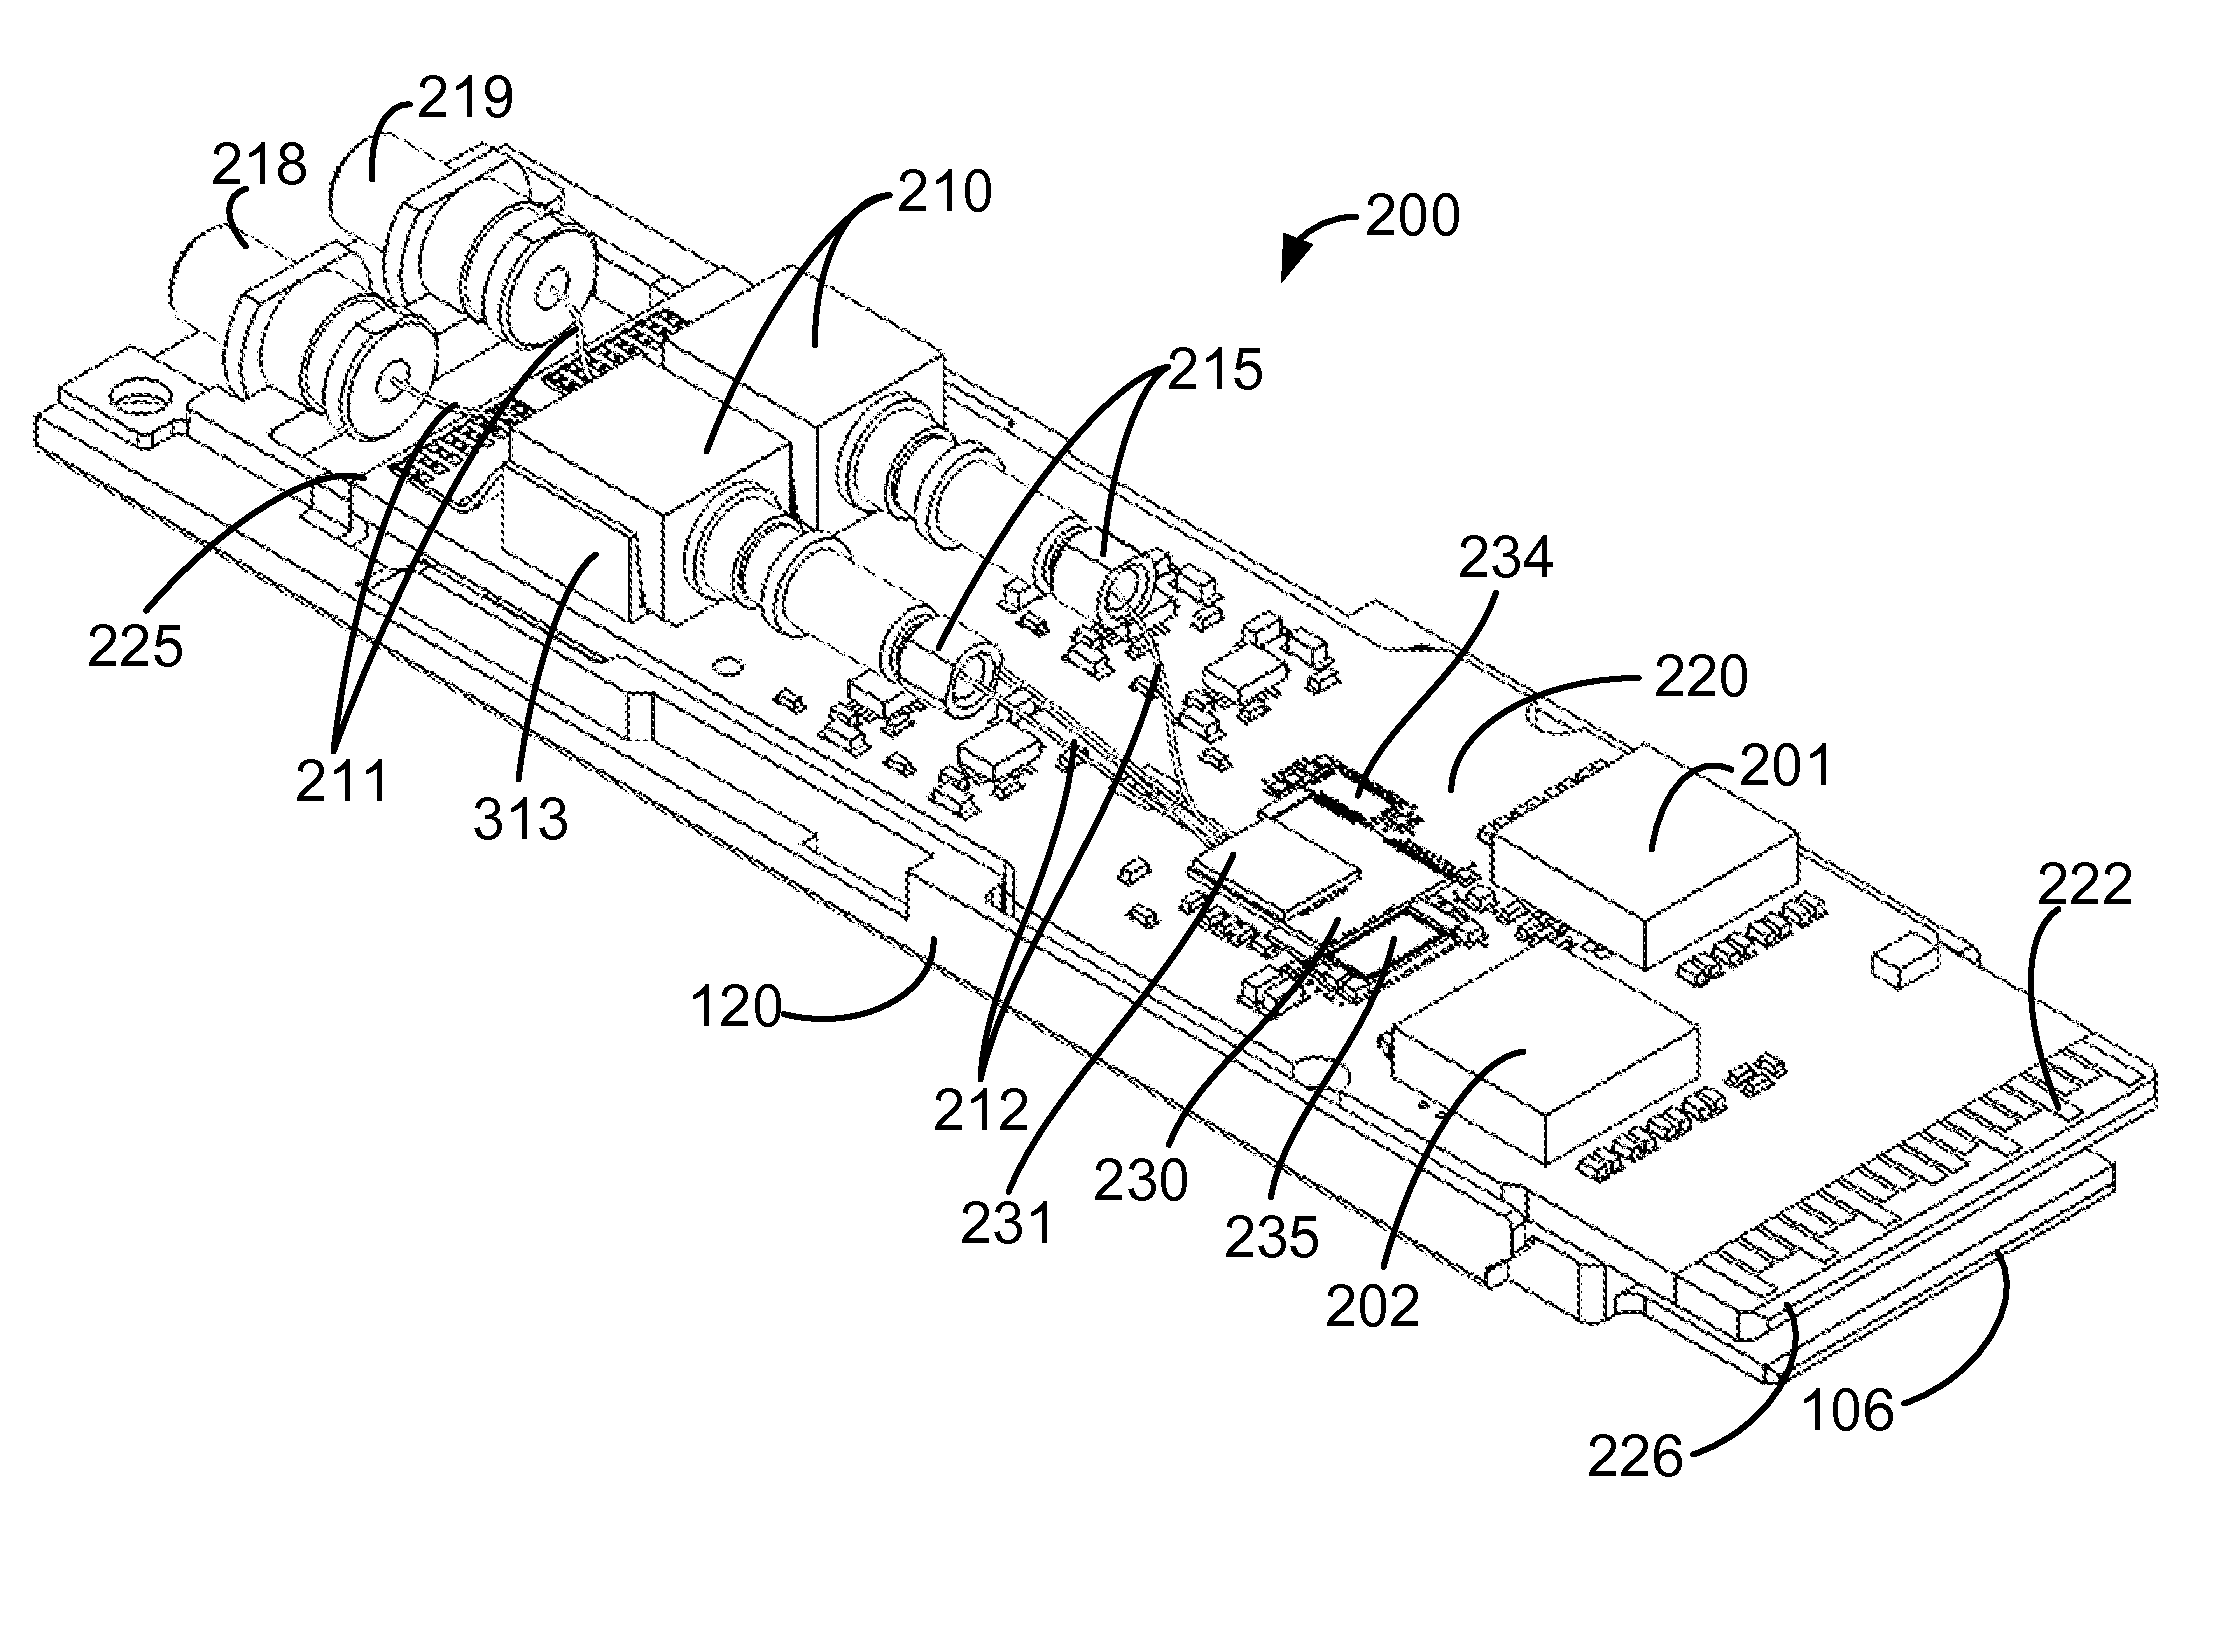 Photonic transceiving device package structure